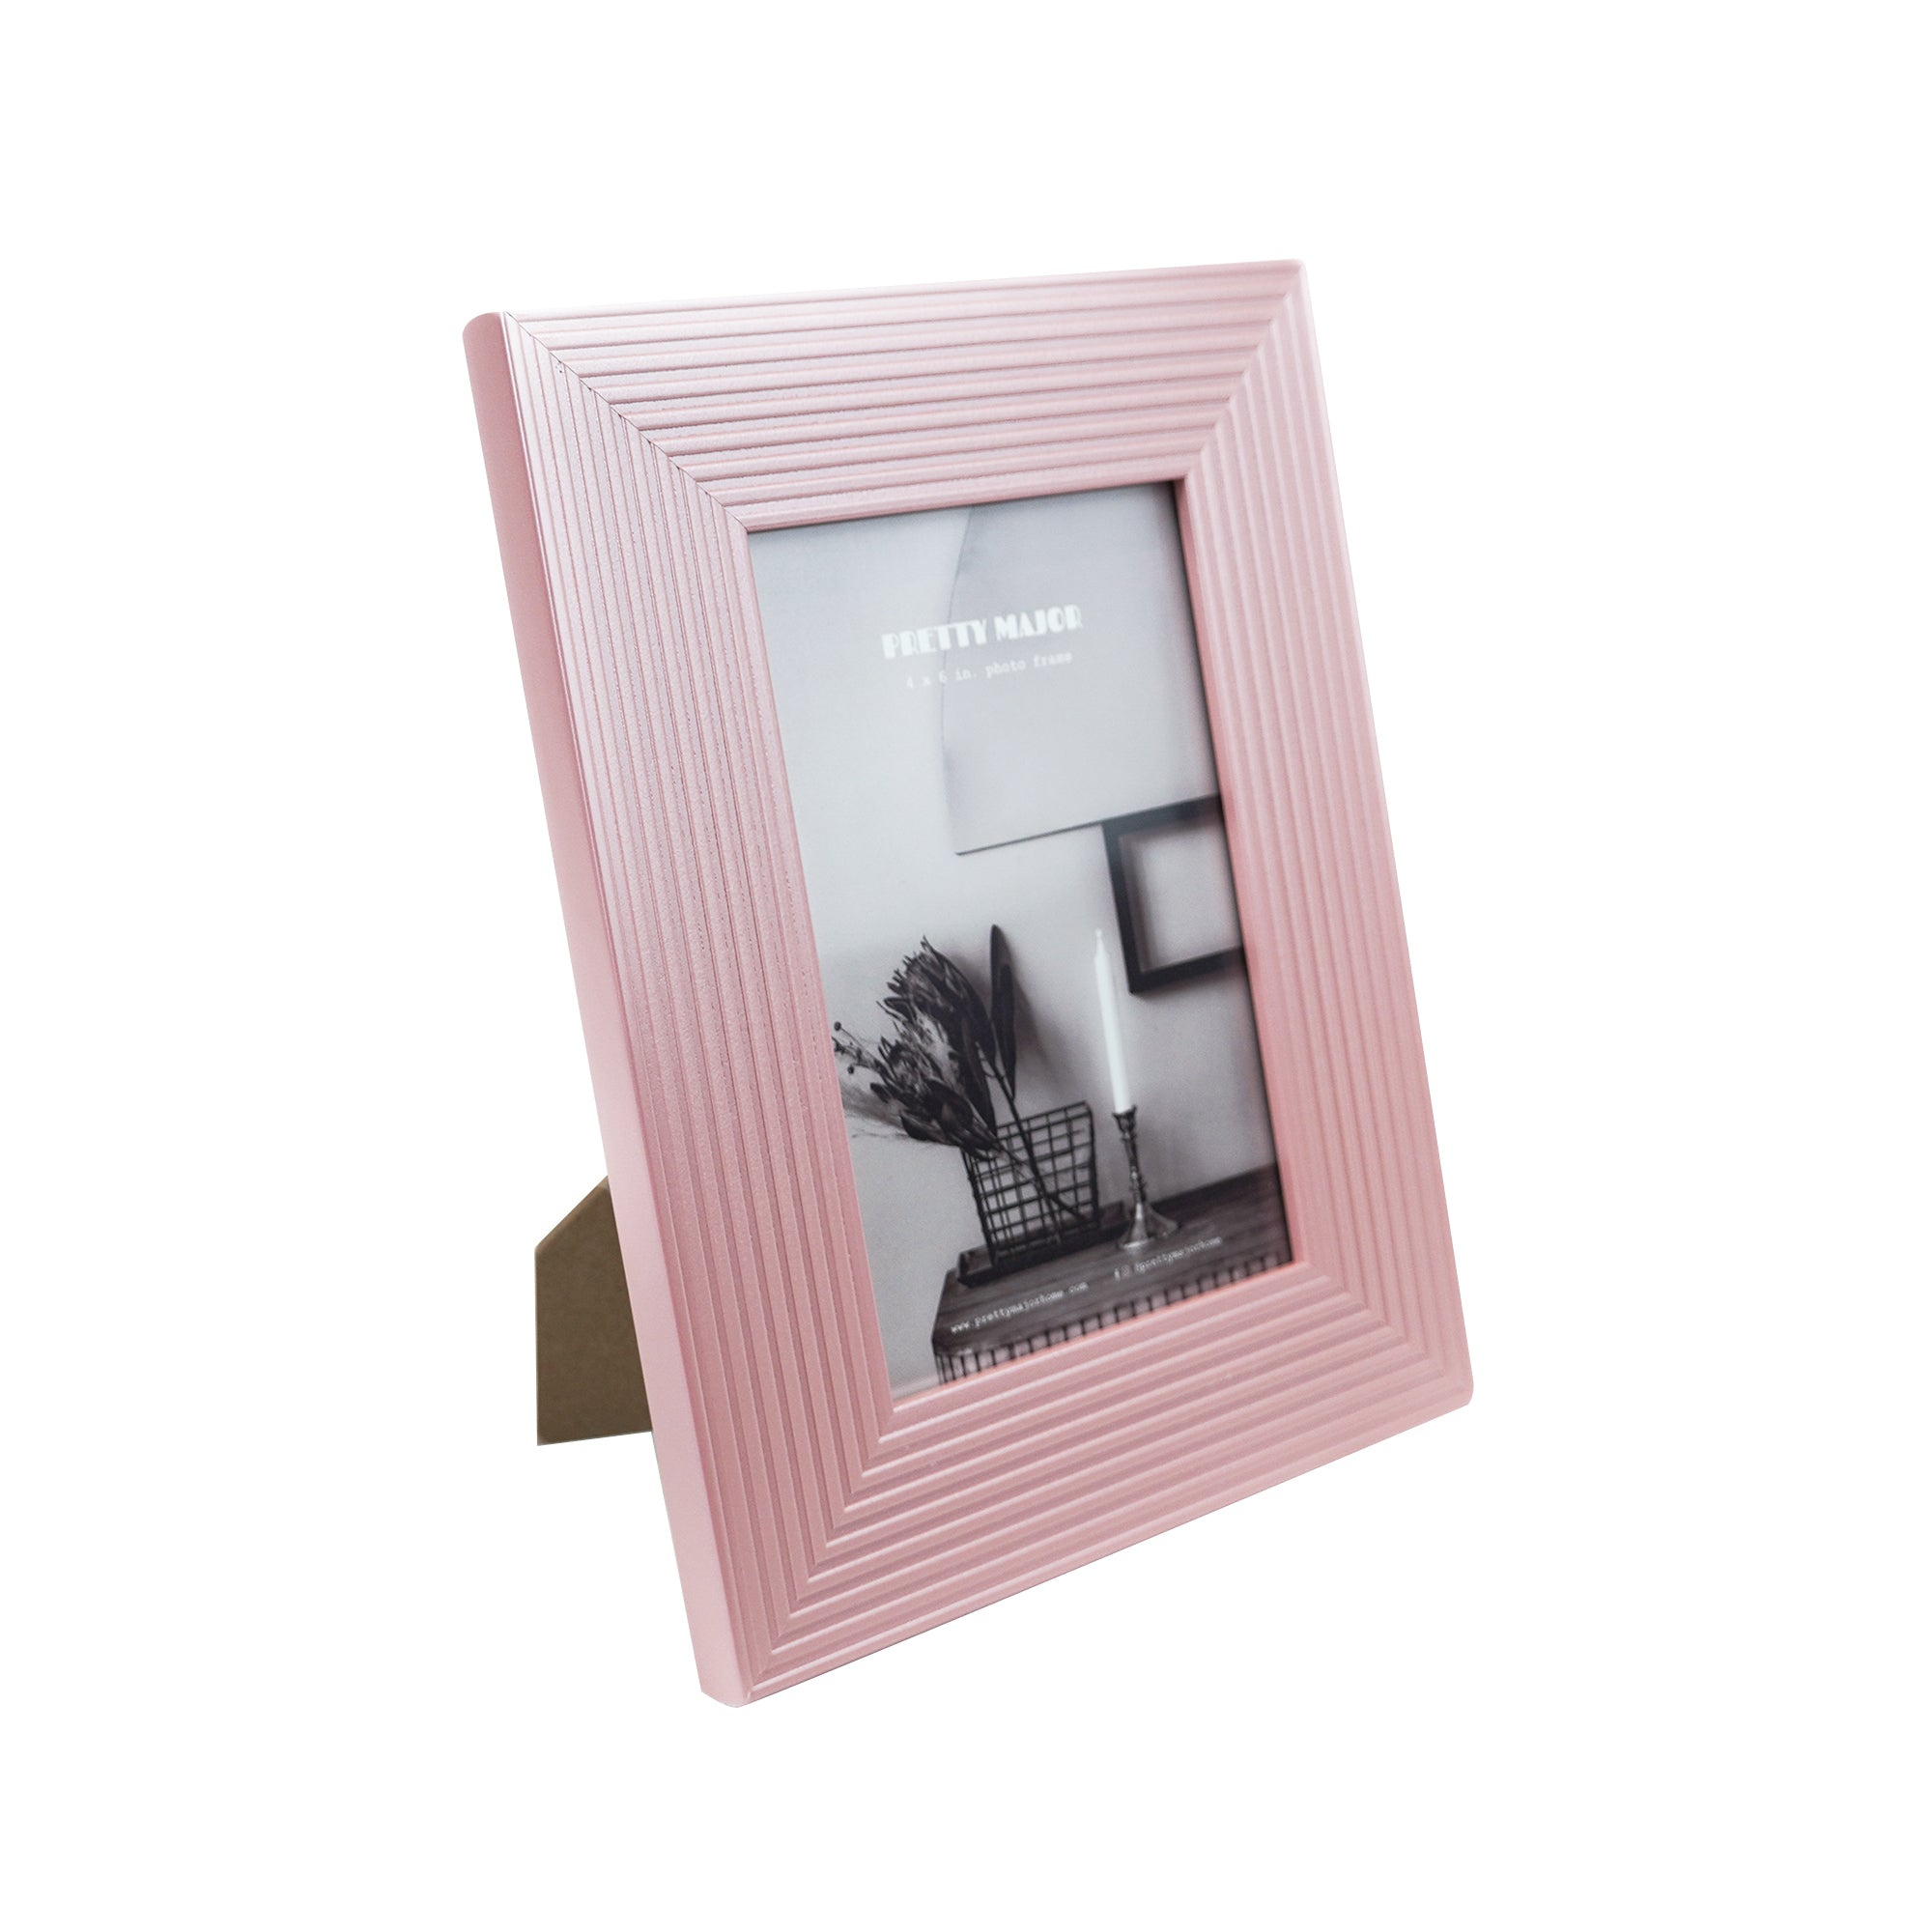 cotton candy pink picture frame 4r photo size